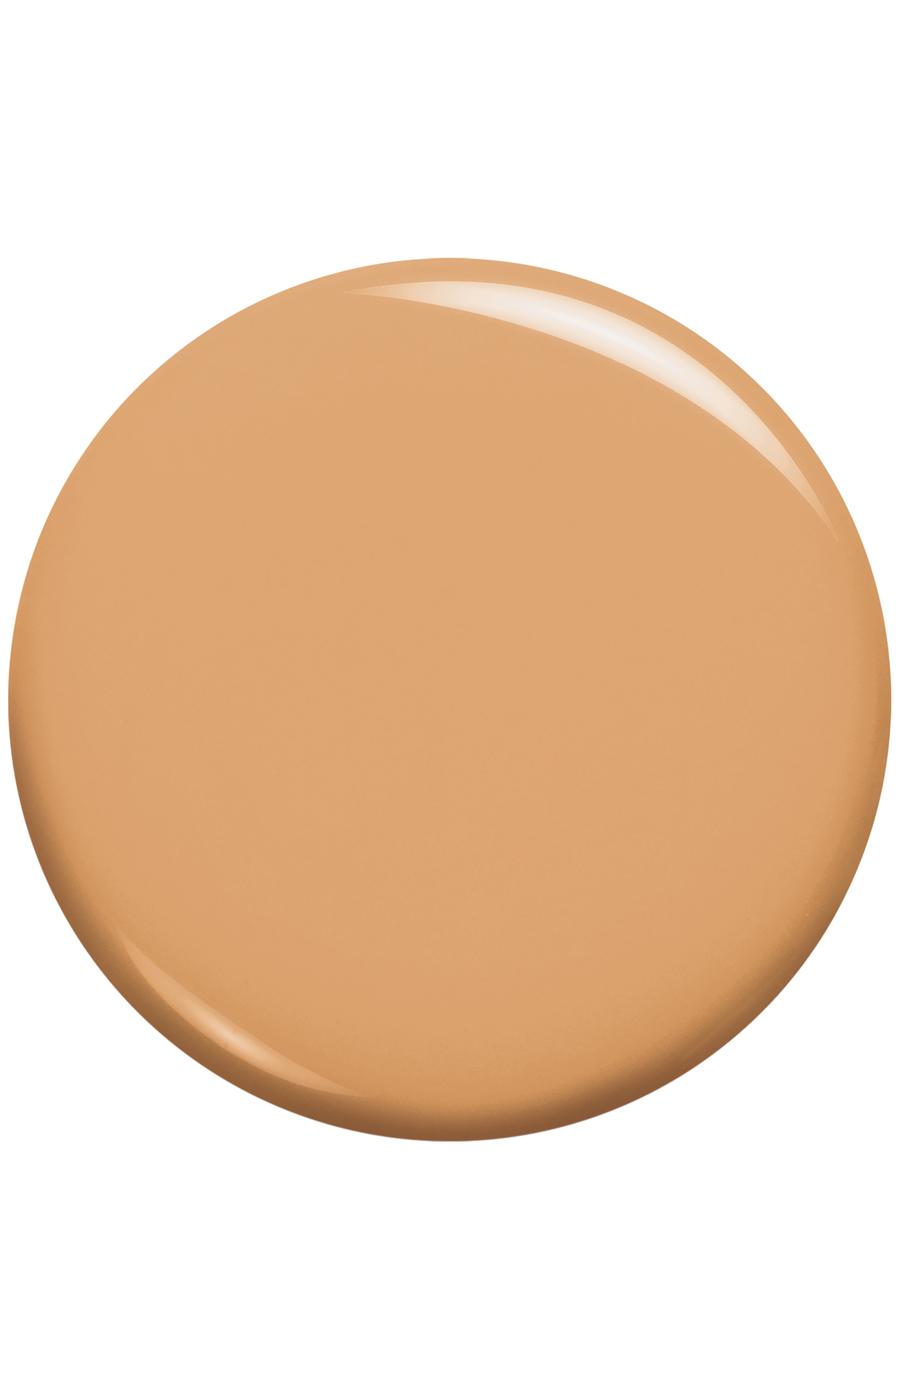 L'Oréal Paris Infallible Up to 24 Hour Fresh Wear Foundation - Lightweight Radiant Sand; image 7 of 7